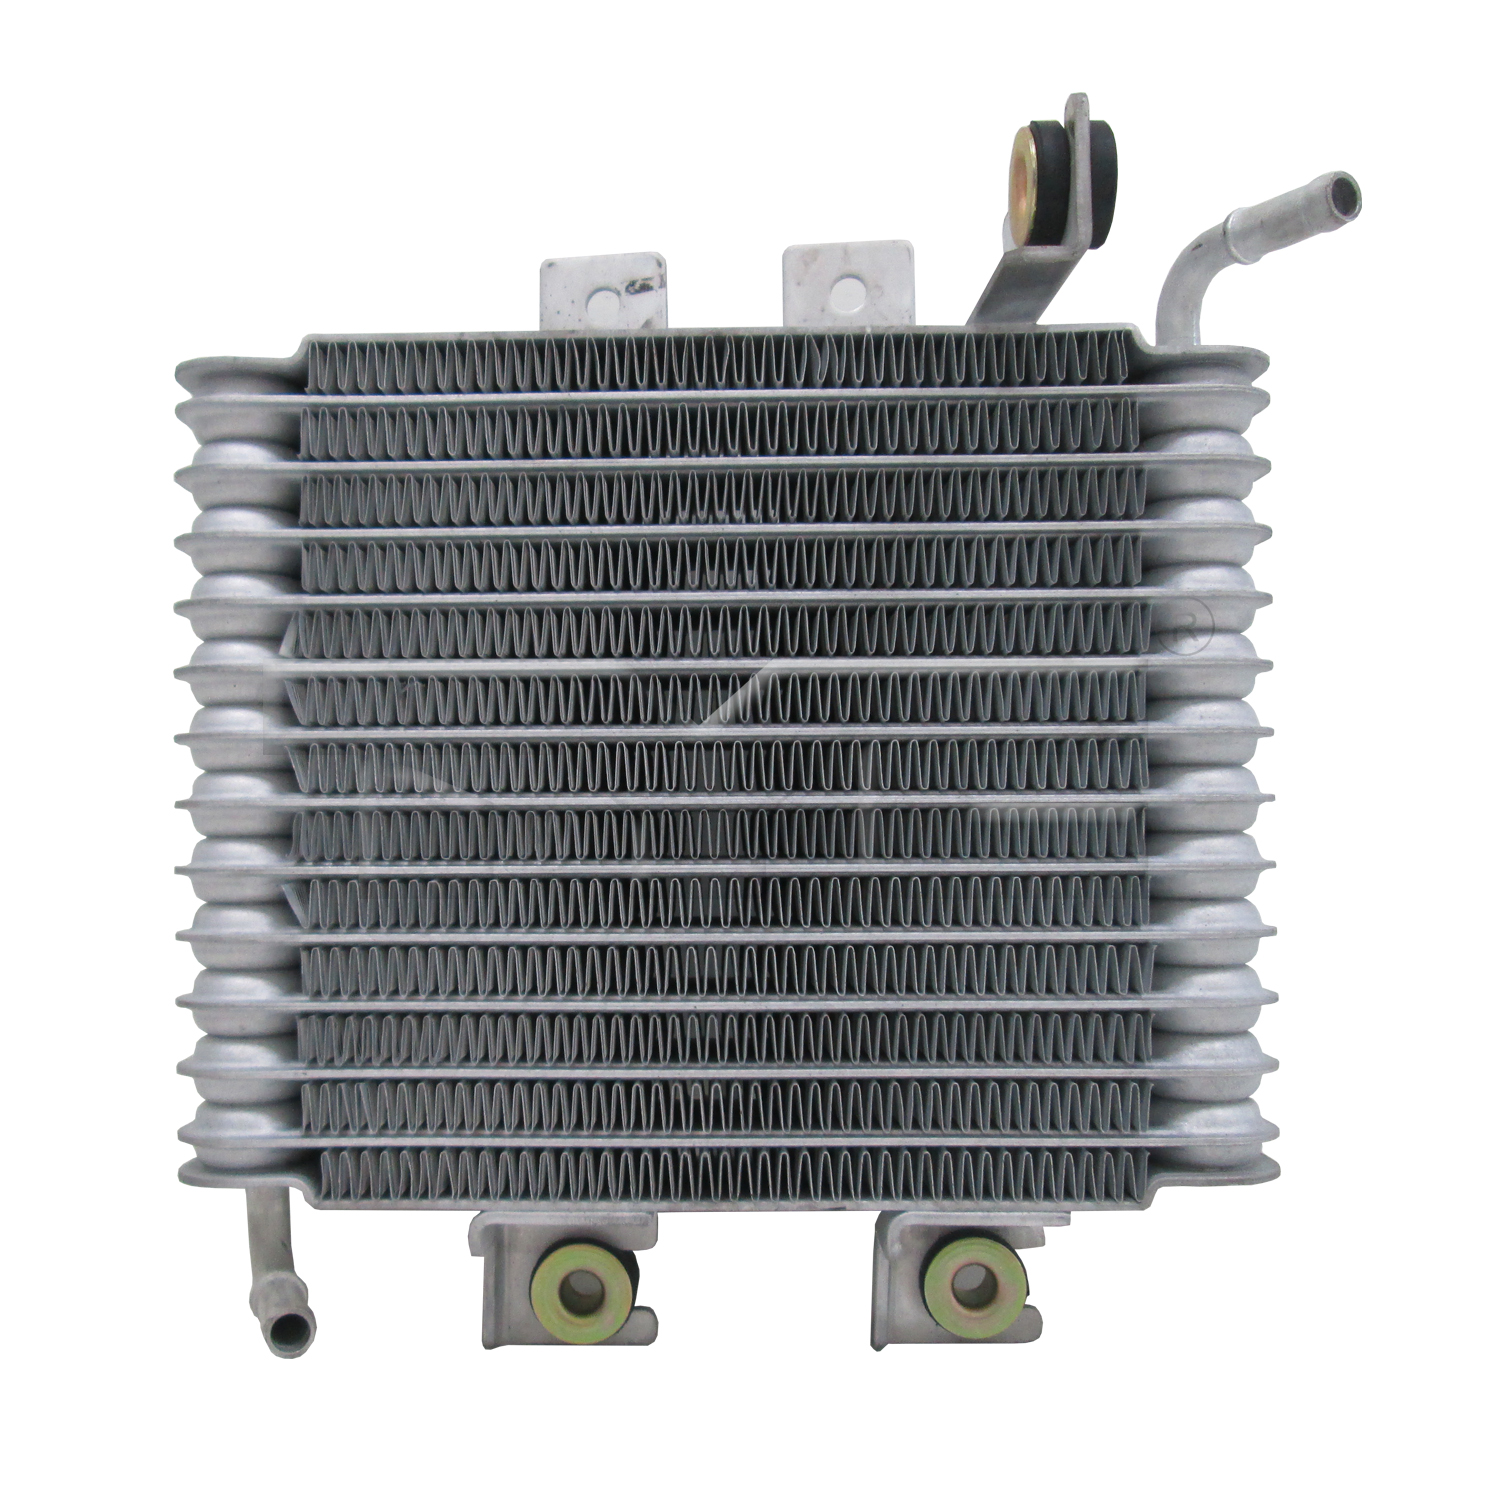 Aftermarket RADIATORS for NISSAN - MAXIMA, MAXIMA,09-14,Transmission cooler assembly